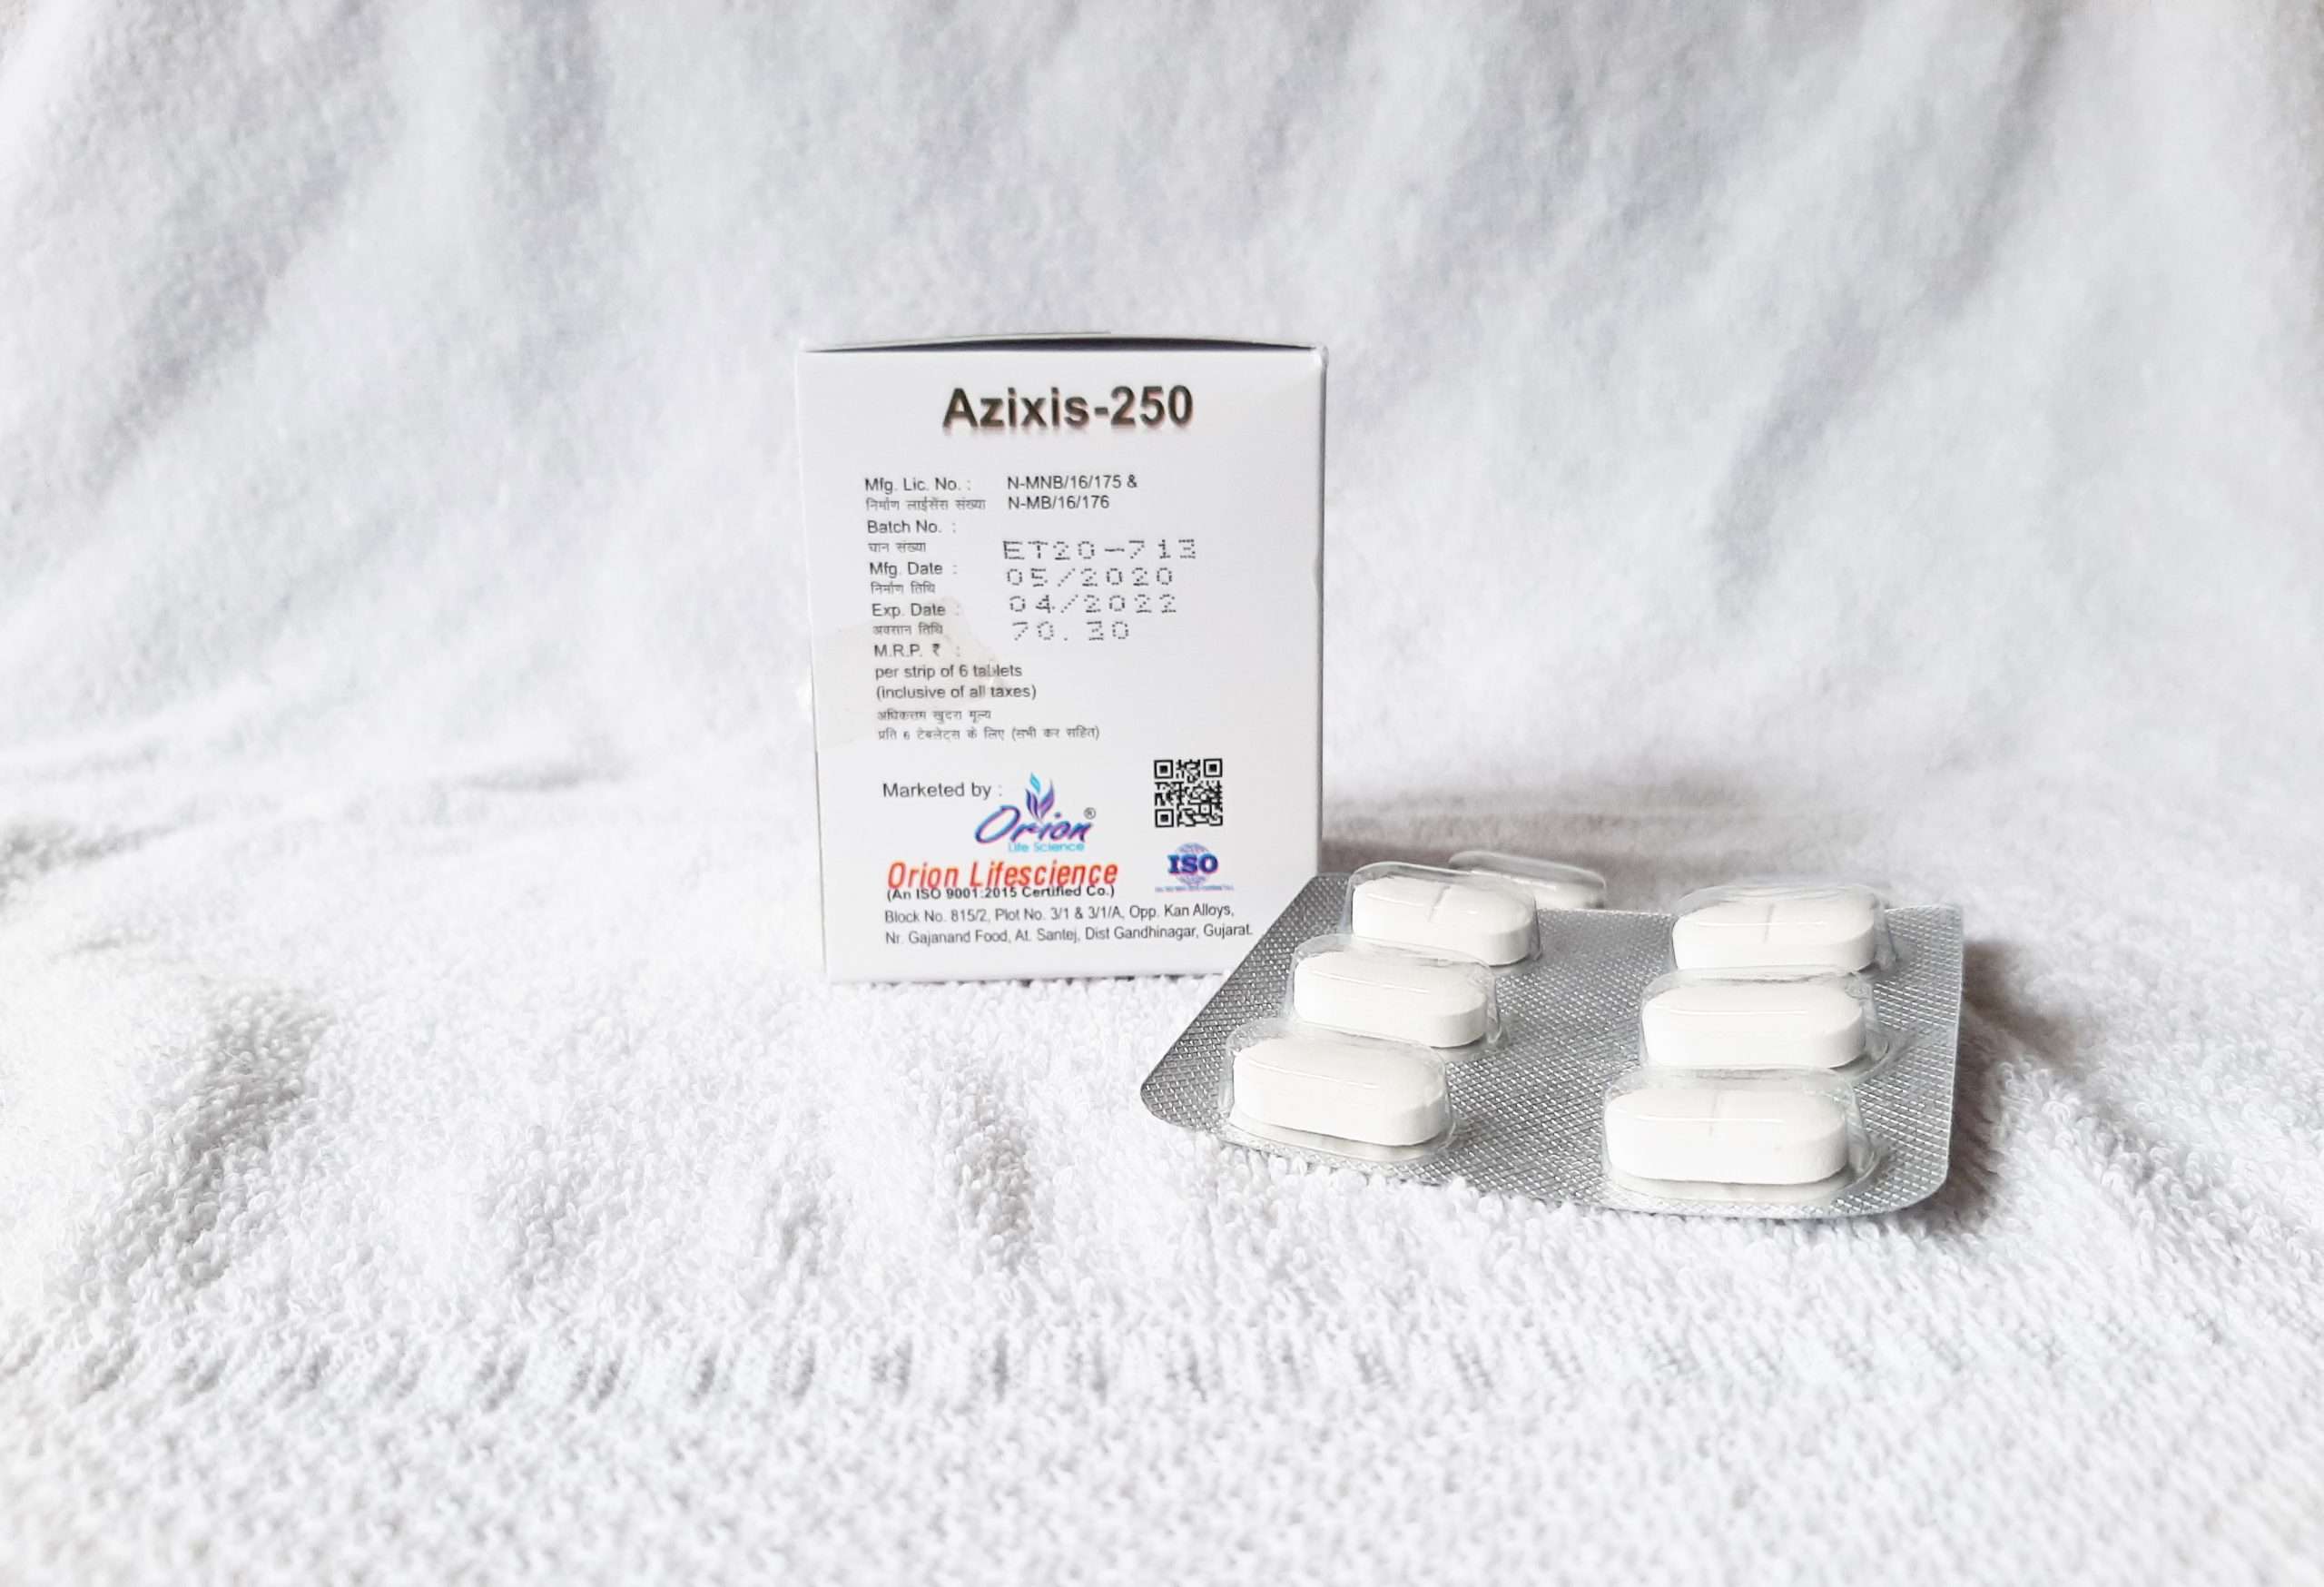 Azithromycin 250 mg Allopathic Tablets